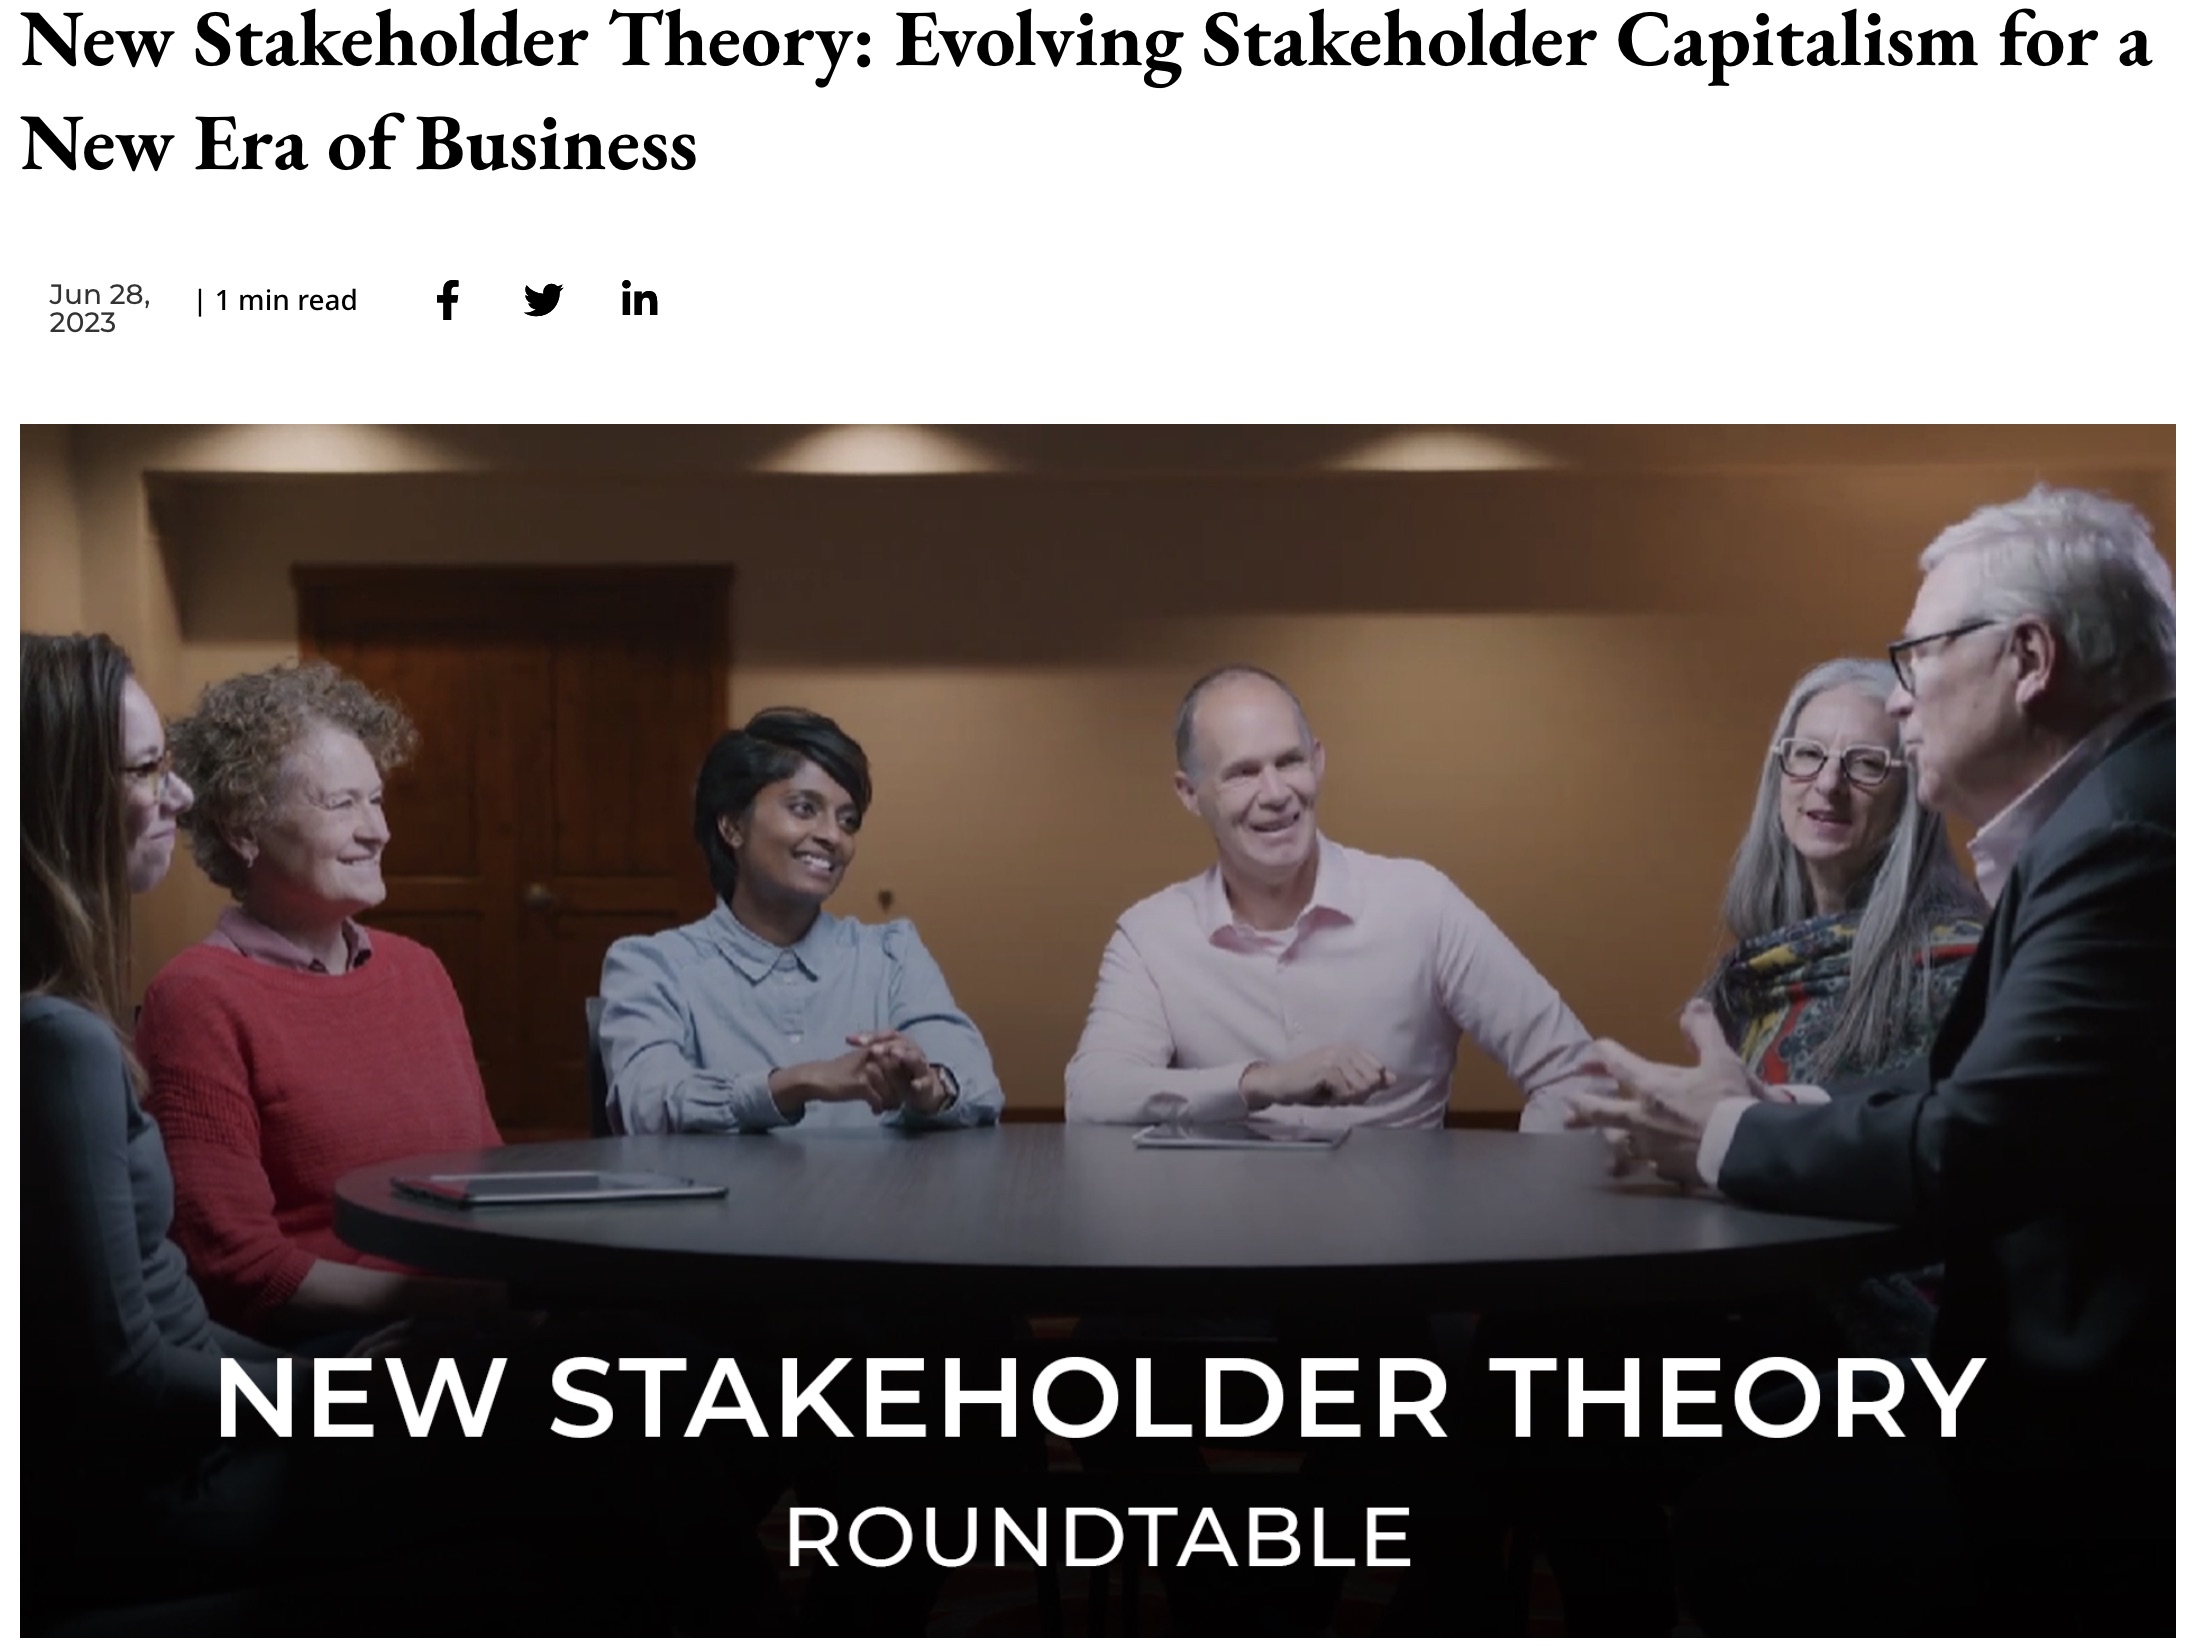 6 people talking at a conference table